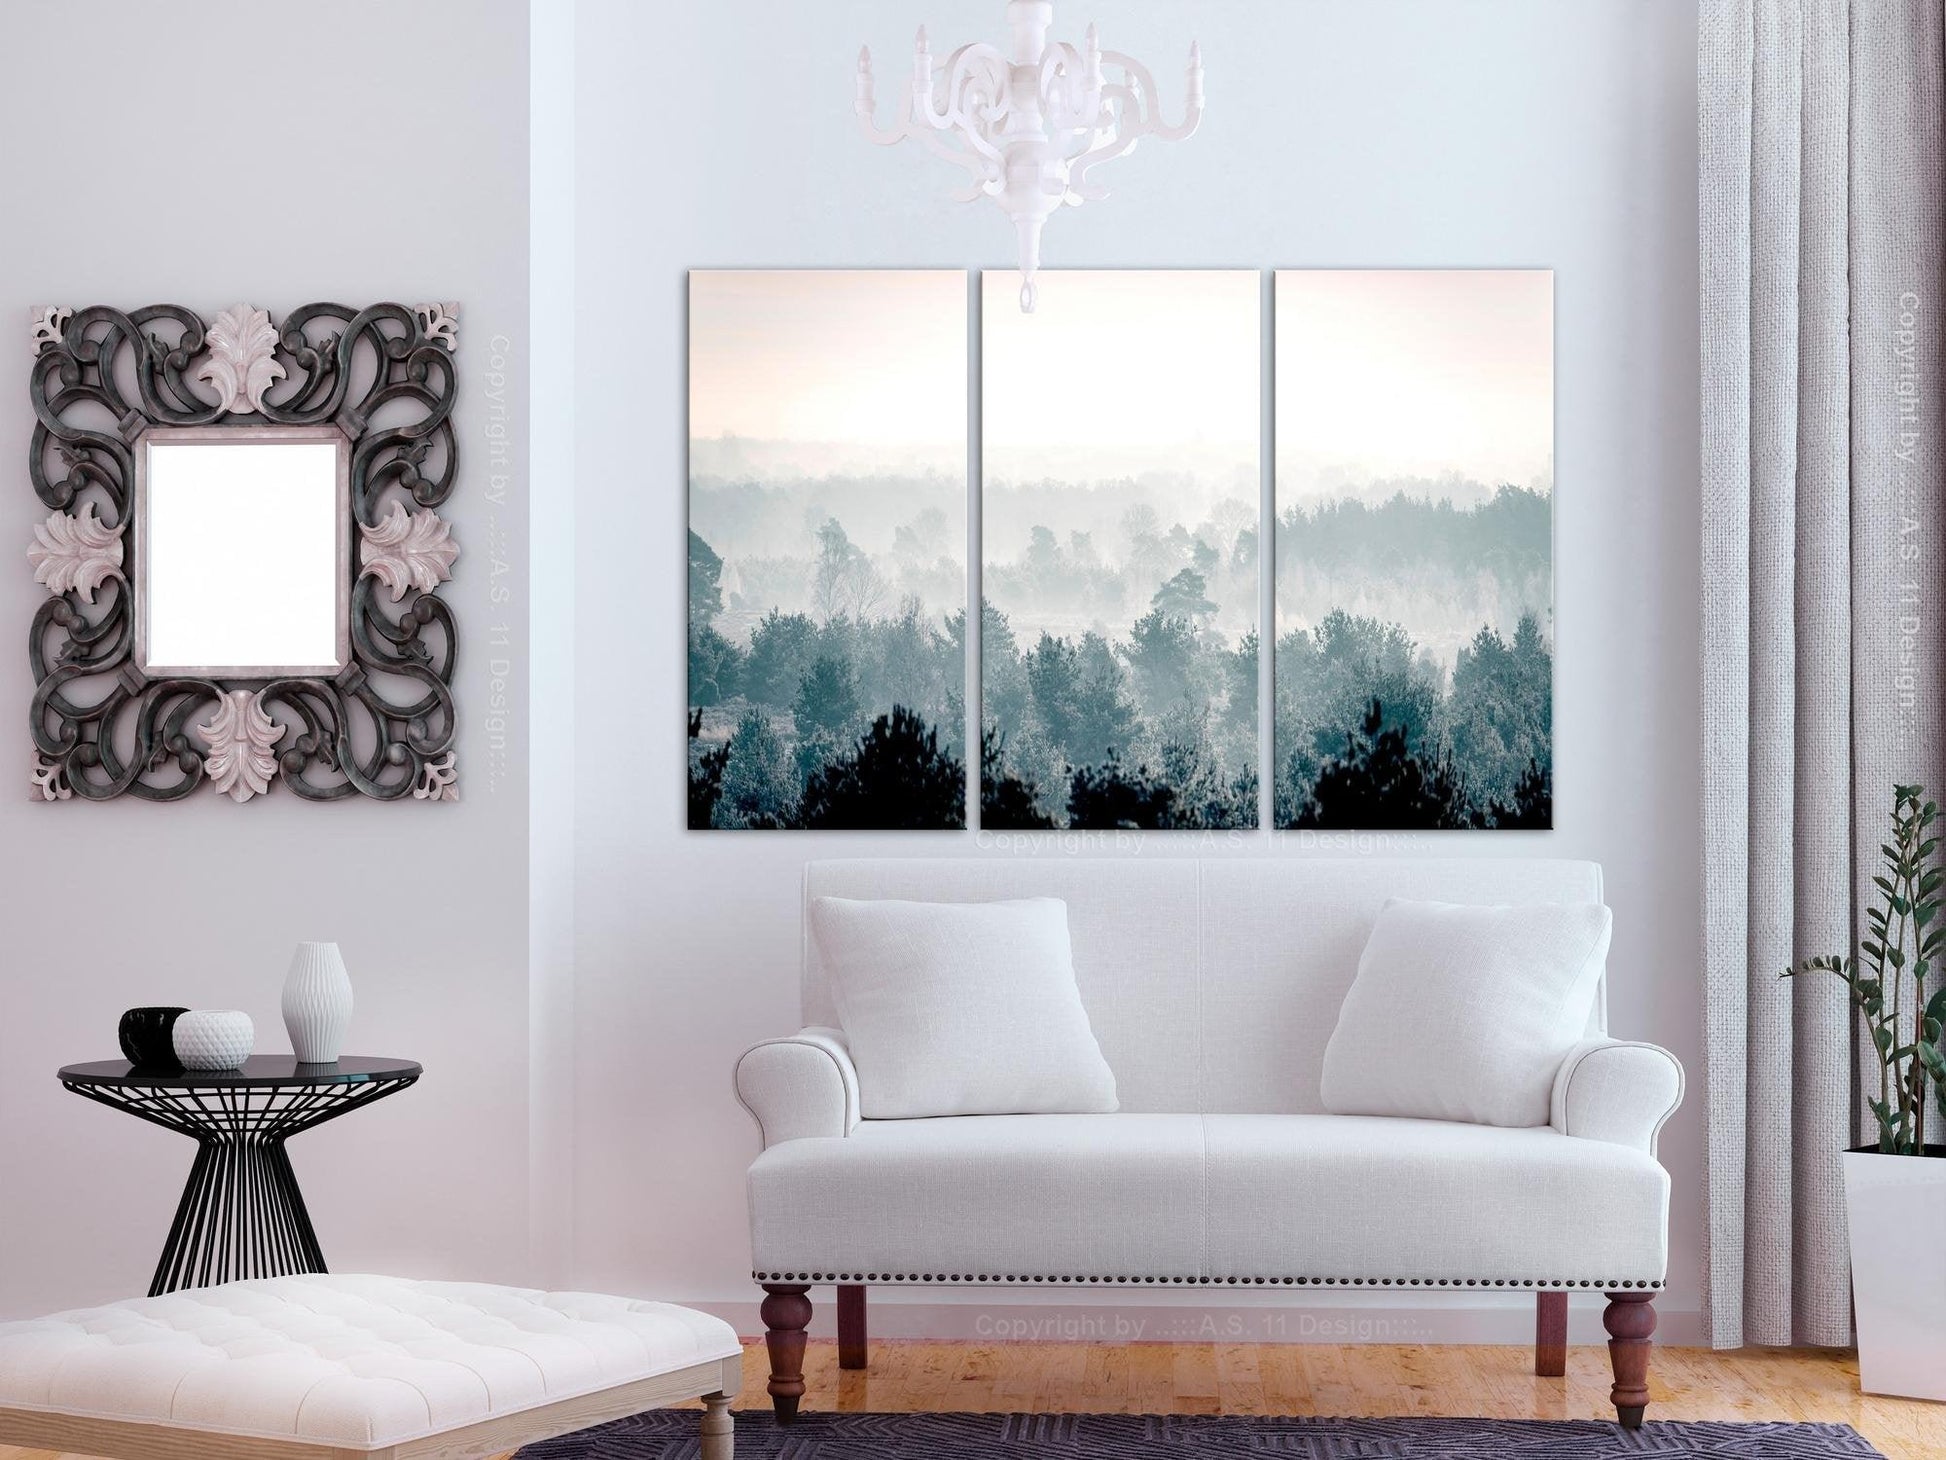 Canvas Print - Winter Forest (3 Parts) - www.trendingbestsellers.com